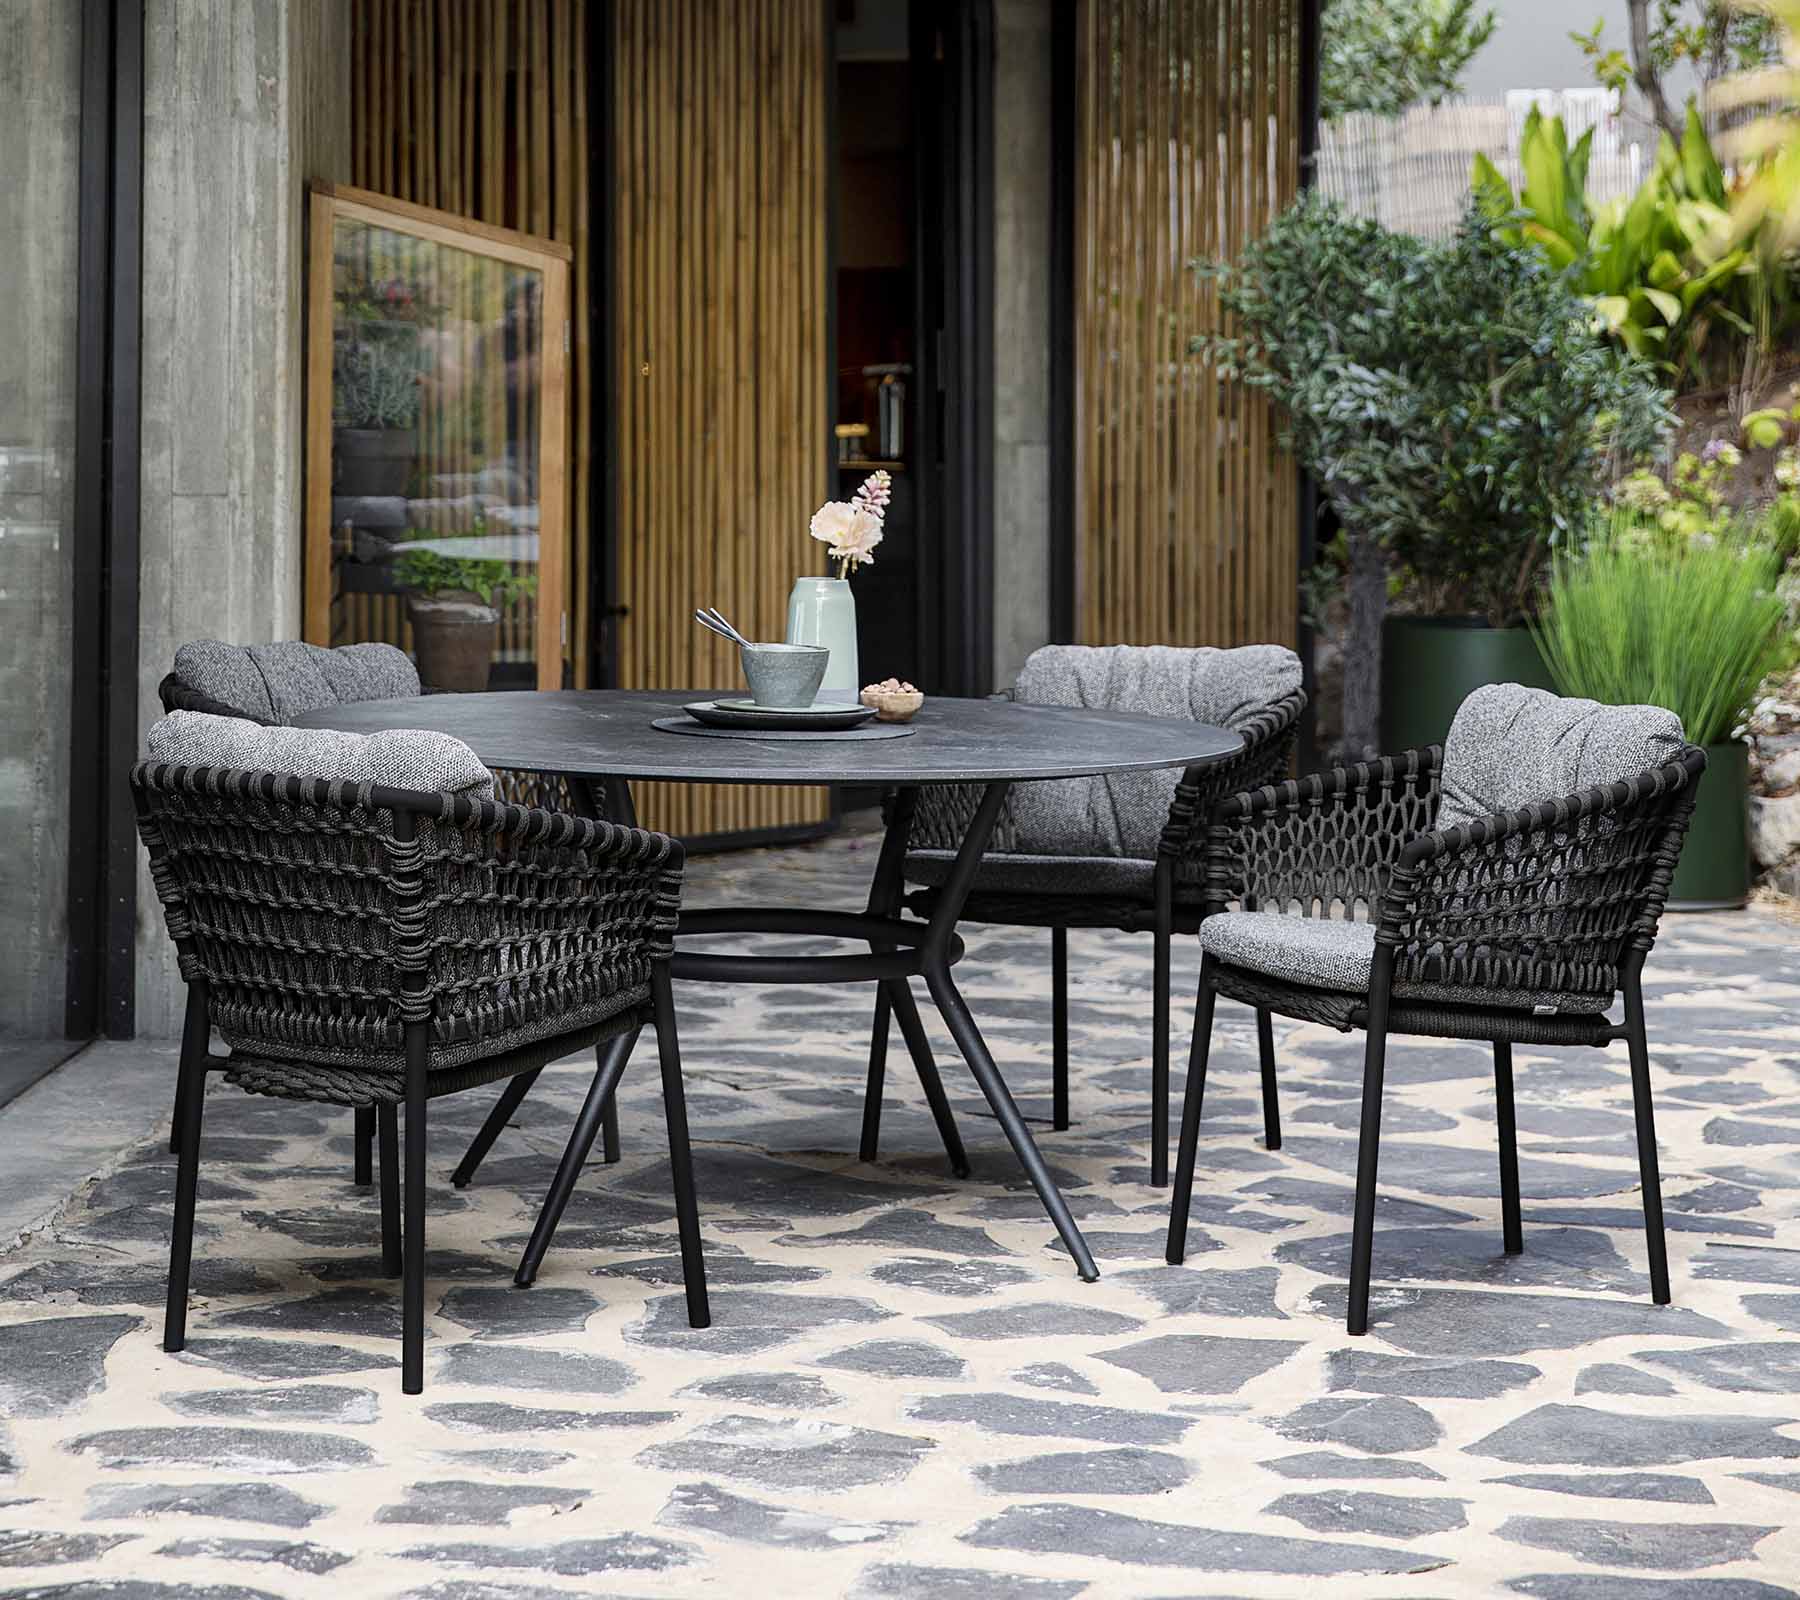 Boxhill's Ocean Outdoor Dining Armchair lifestyle image with round dining table at patio